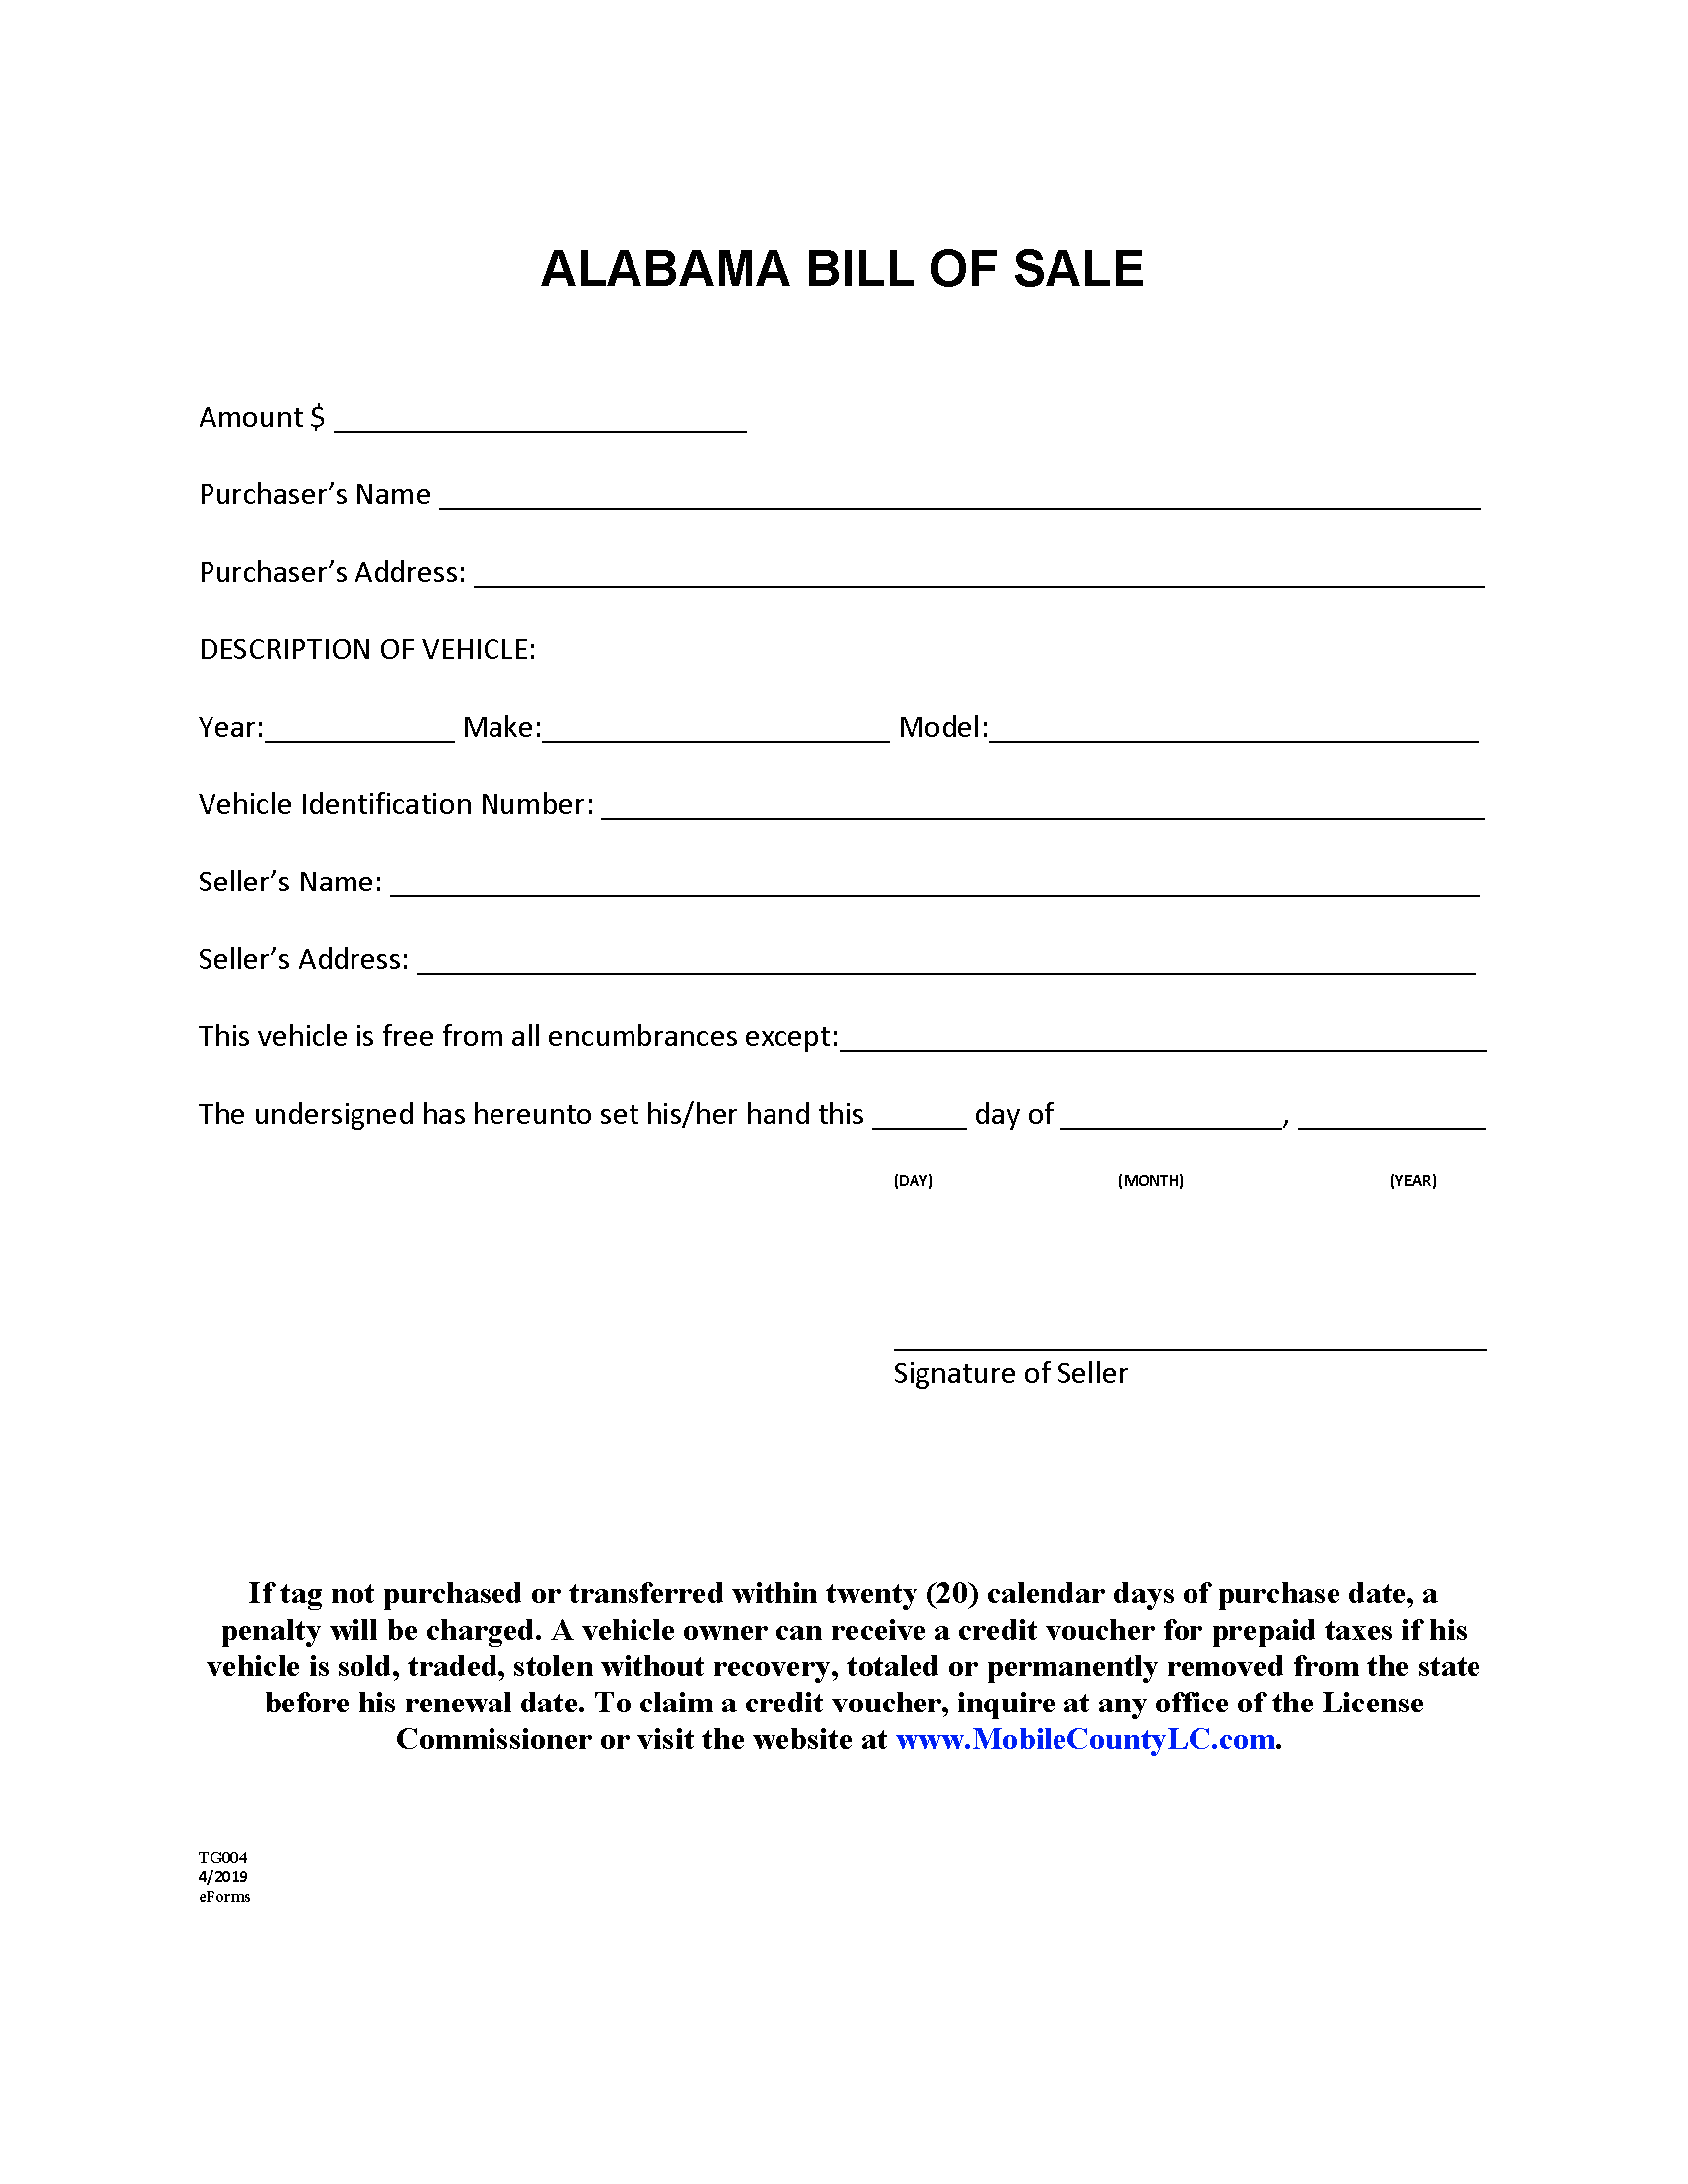 alabama-vehicle-bill-of-sale-fill-online-printable-fillable-blank-my